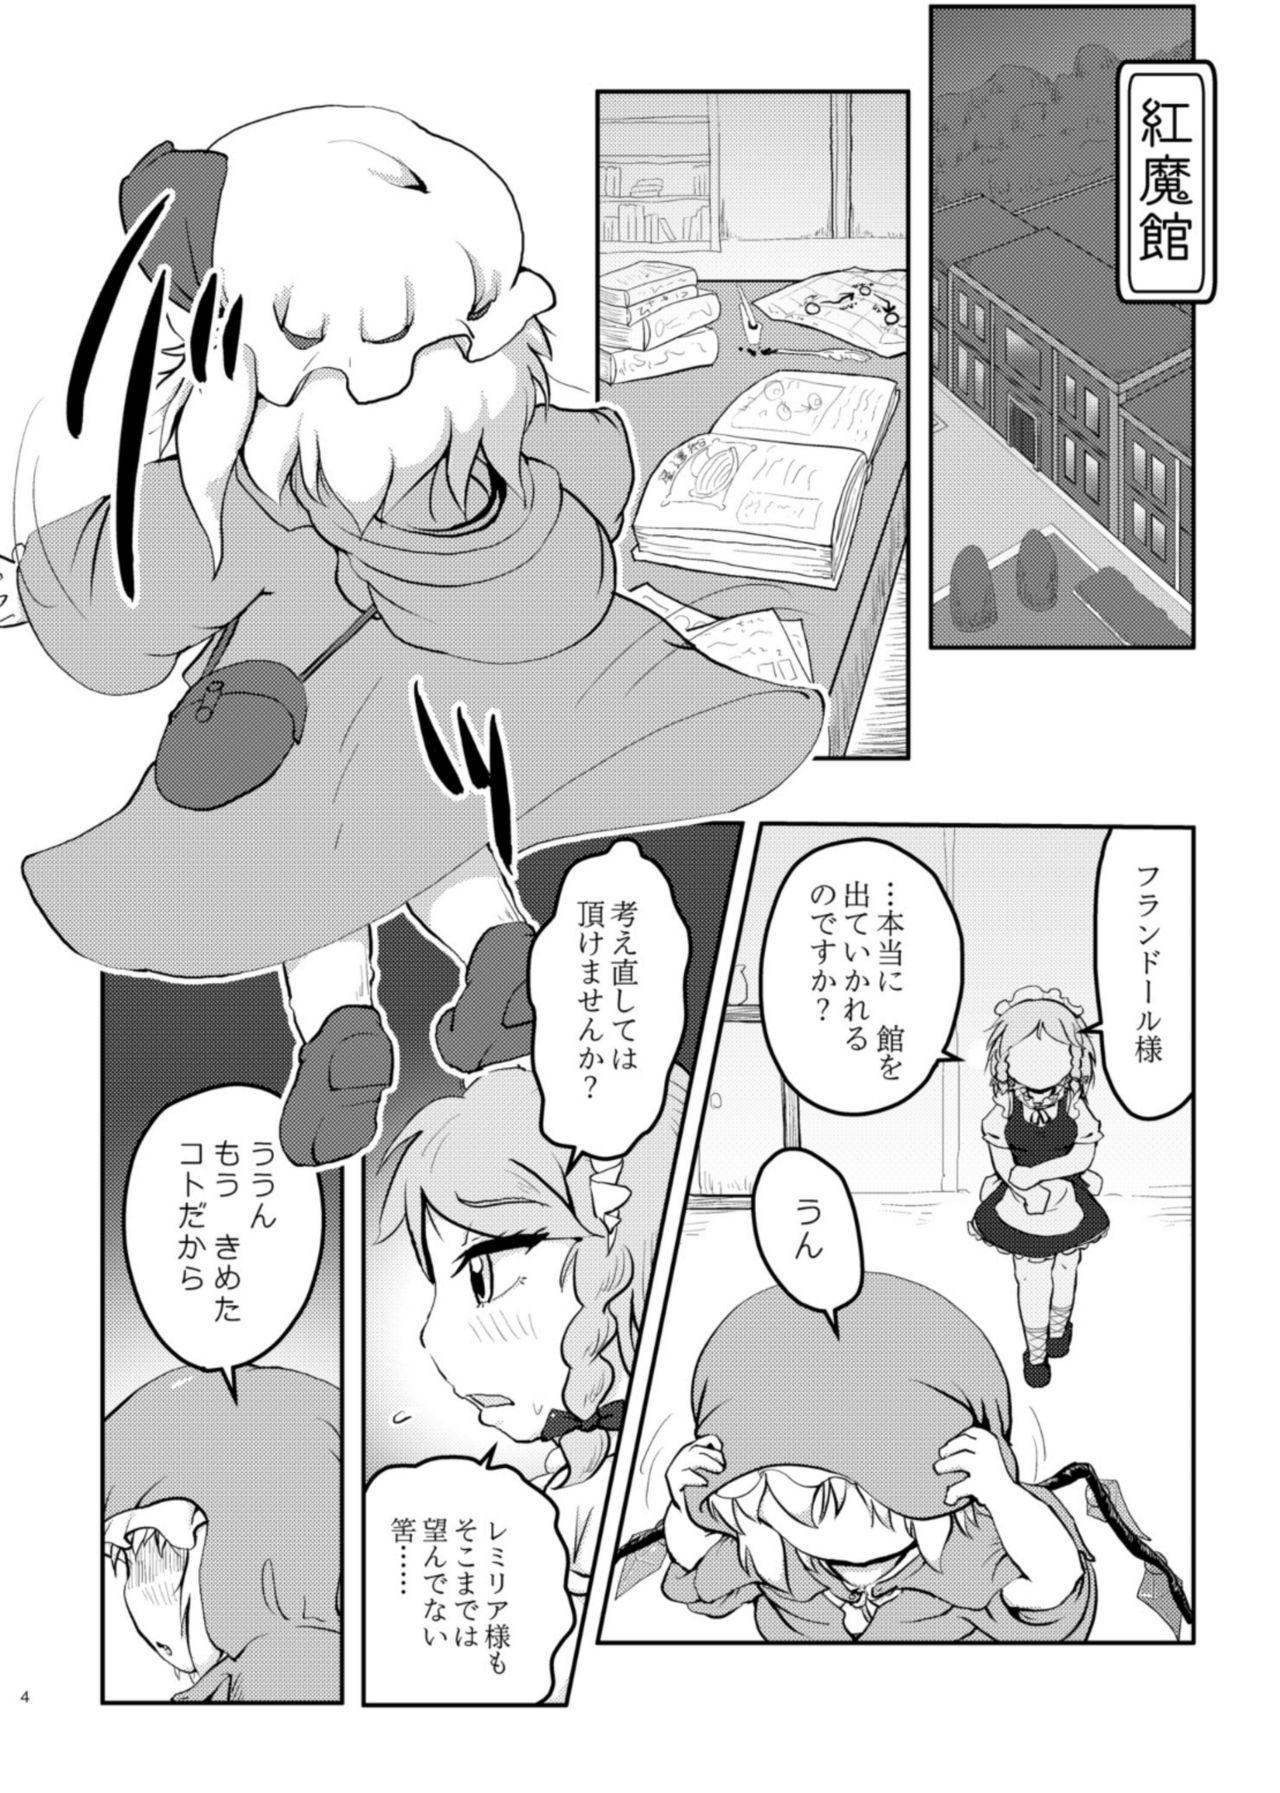 Balls Scarlet Conflict 2 - Touhou project Pija - Page 4